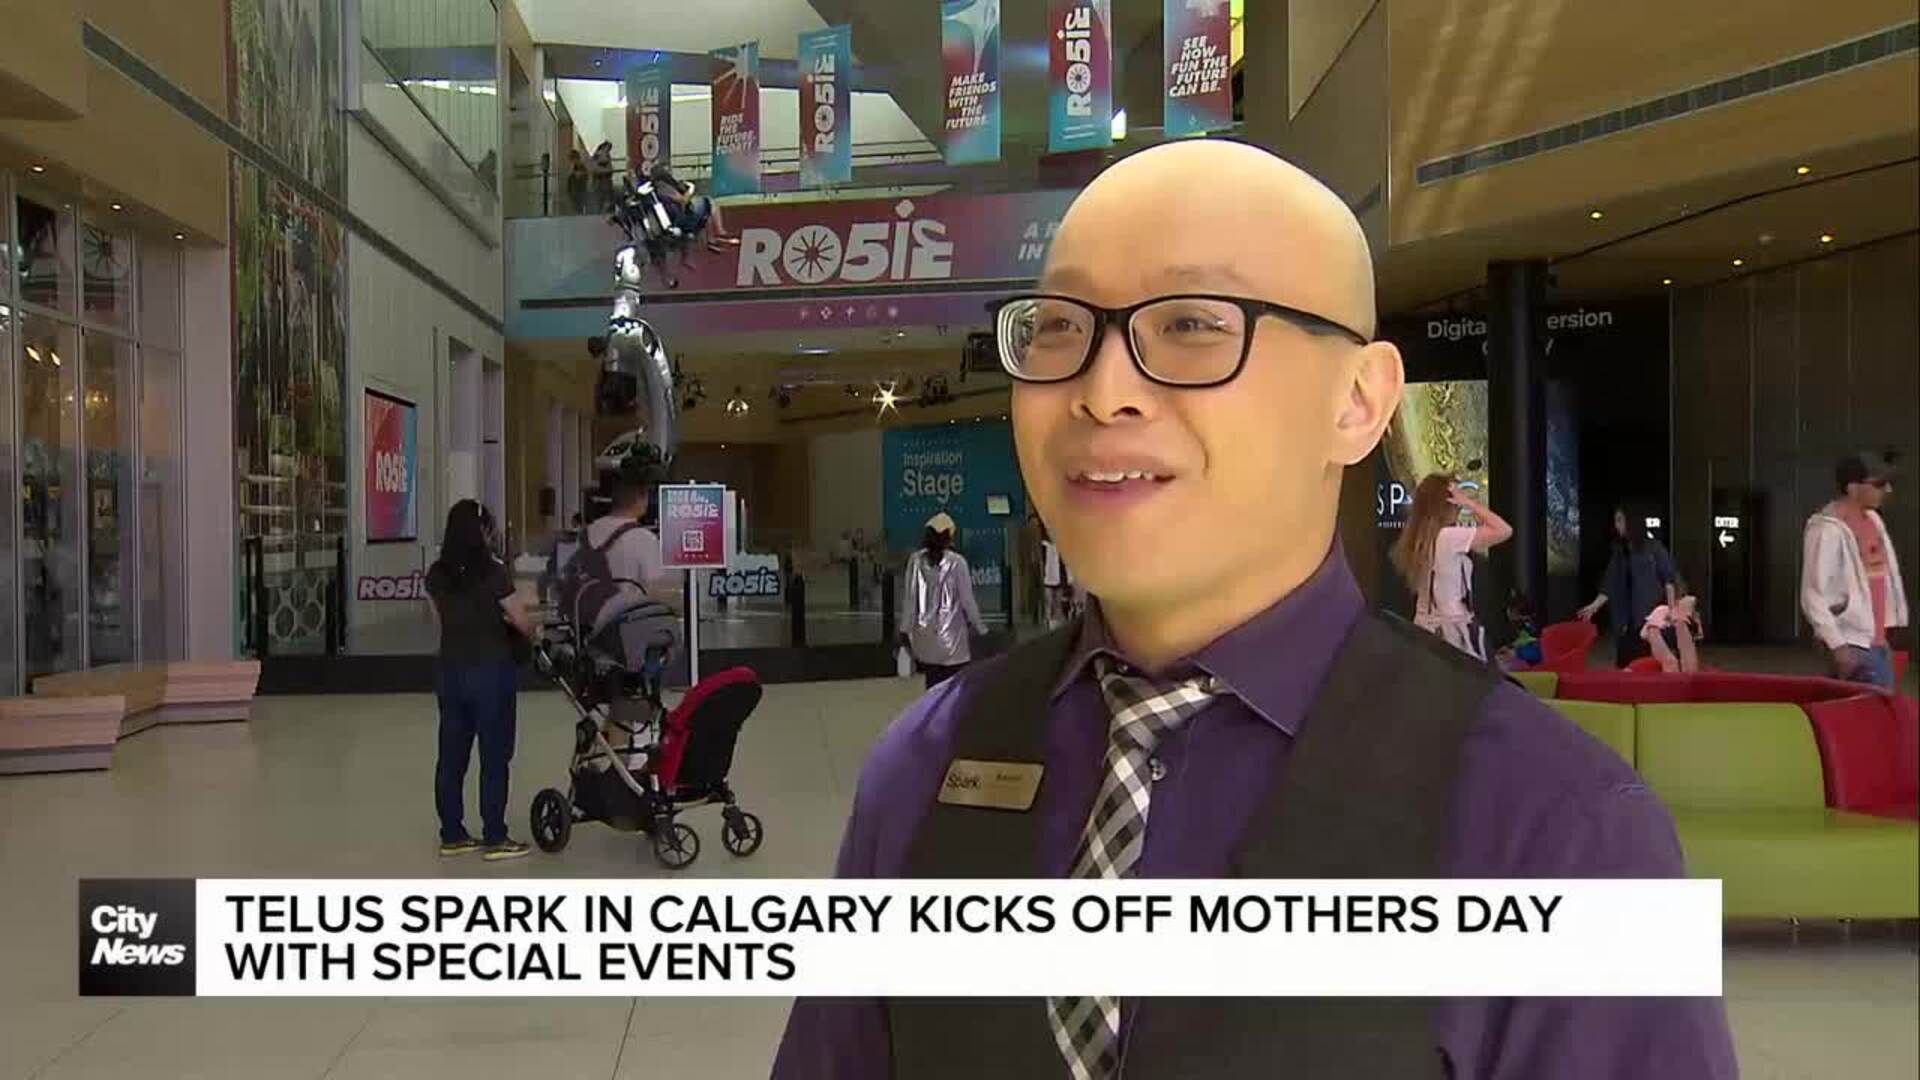 Telus Spark in Calgary kicks off Mothers Day with special events